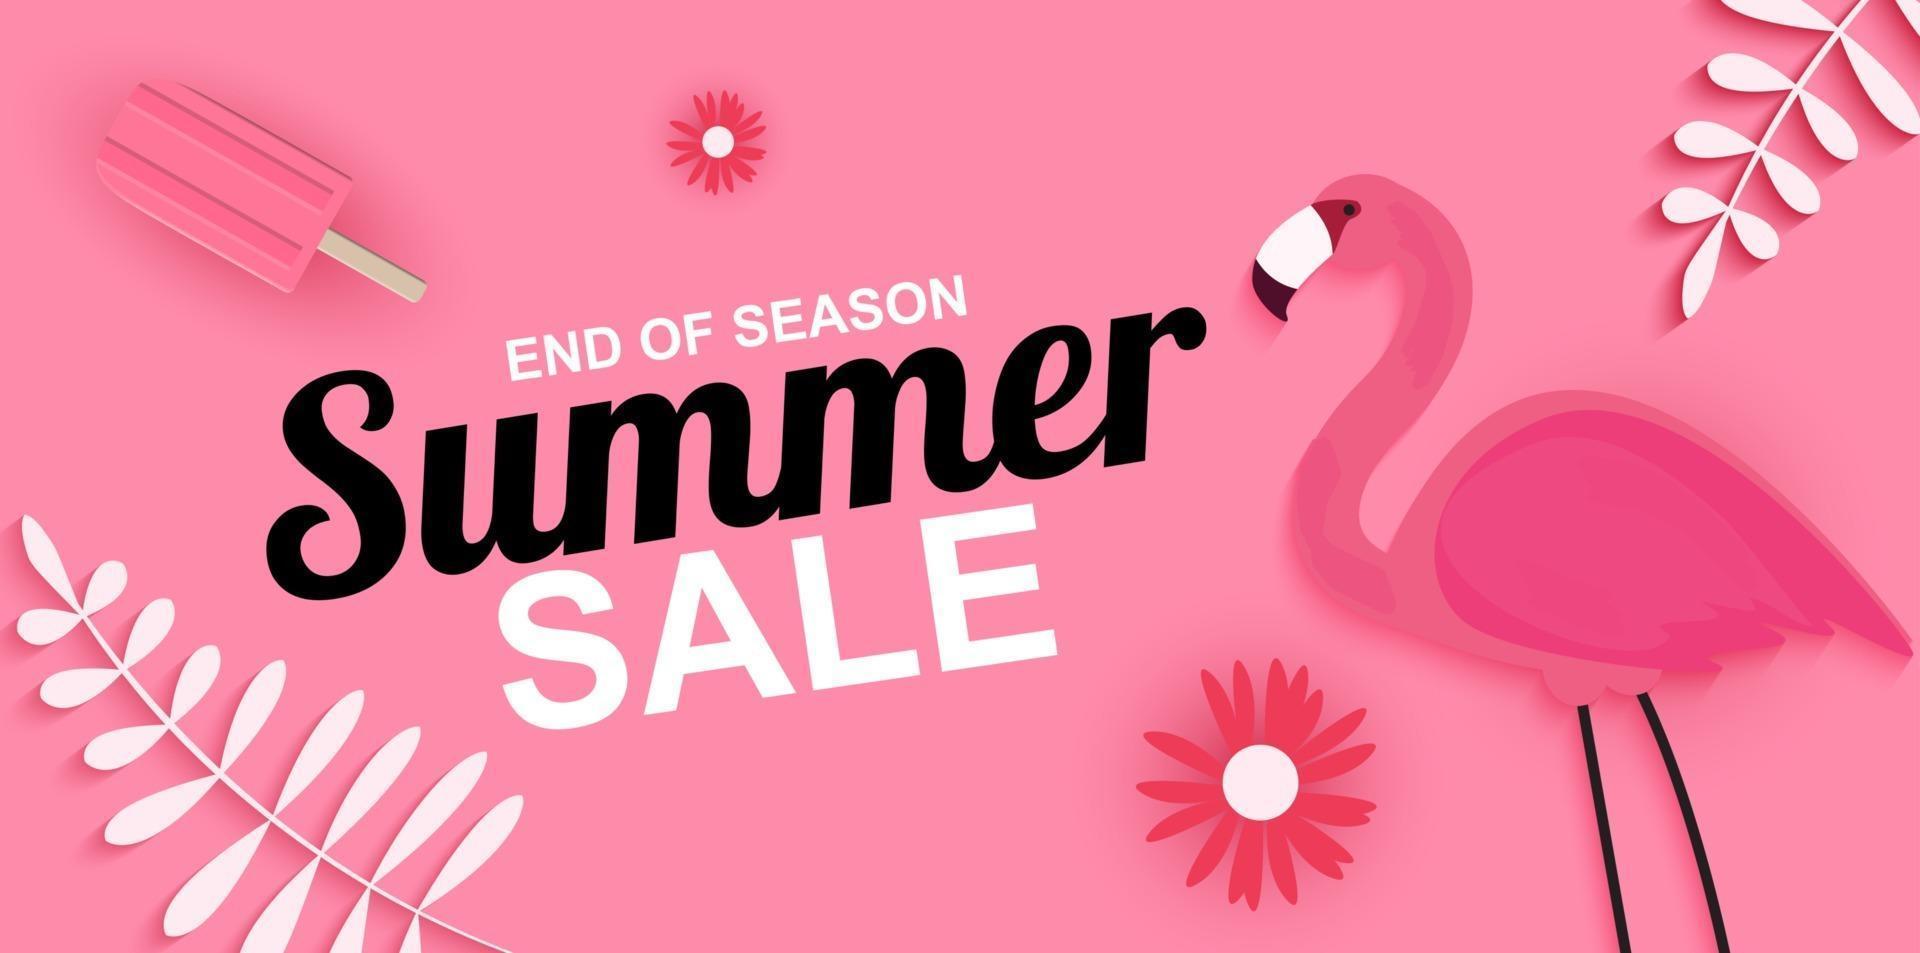 End of season Summer sale poster background vector